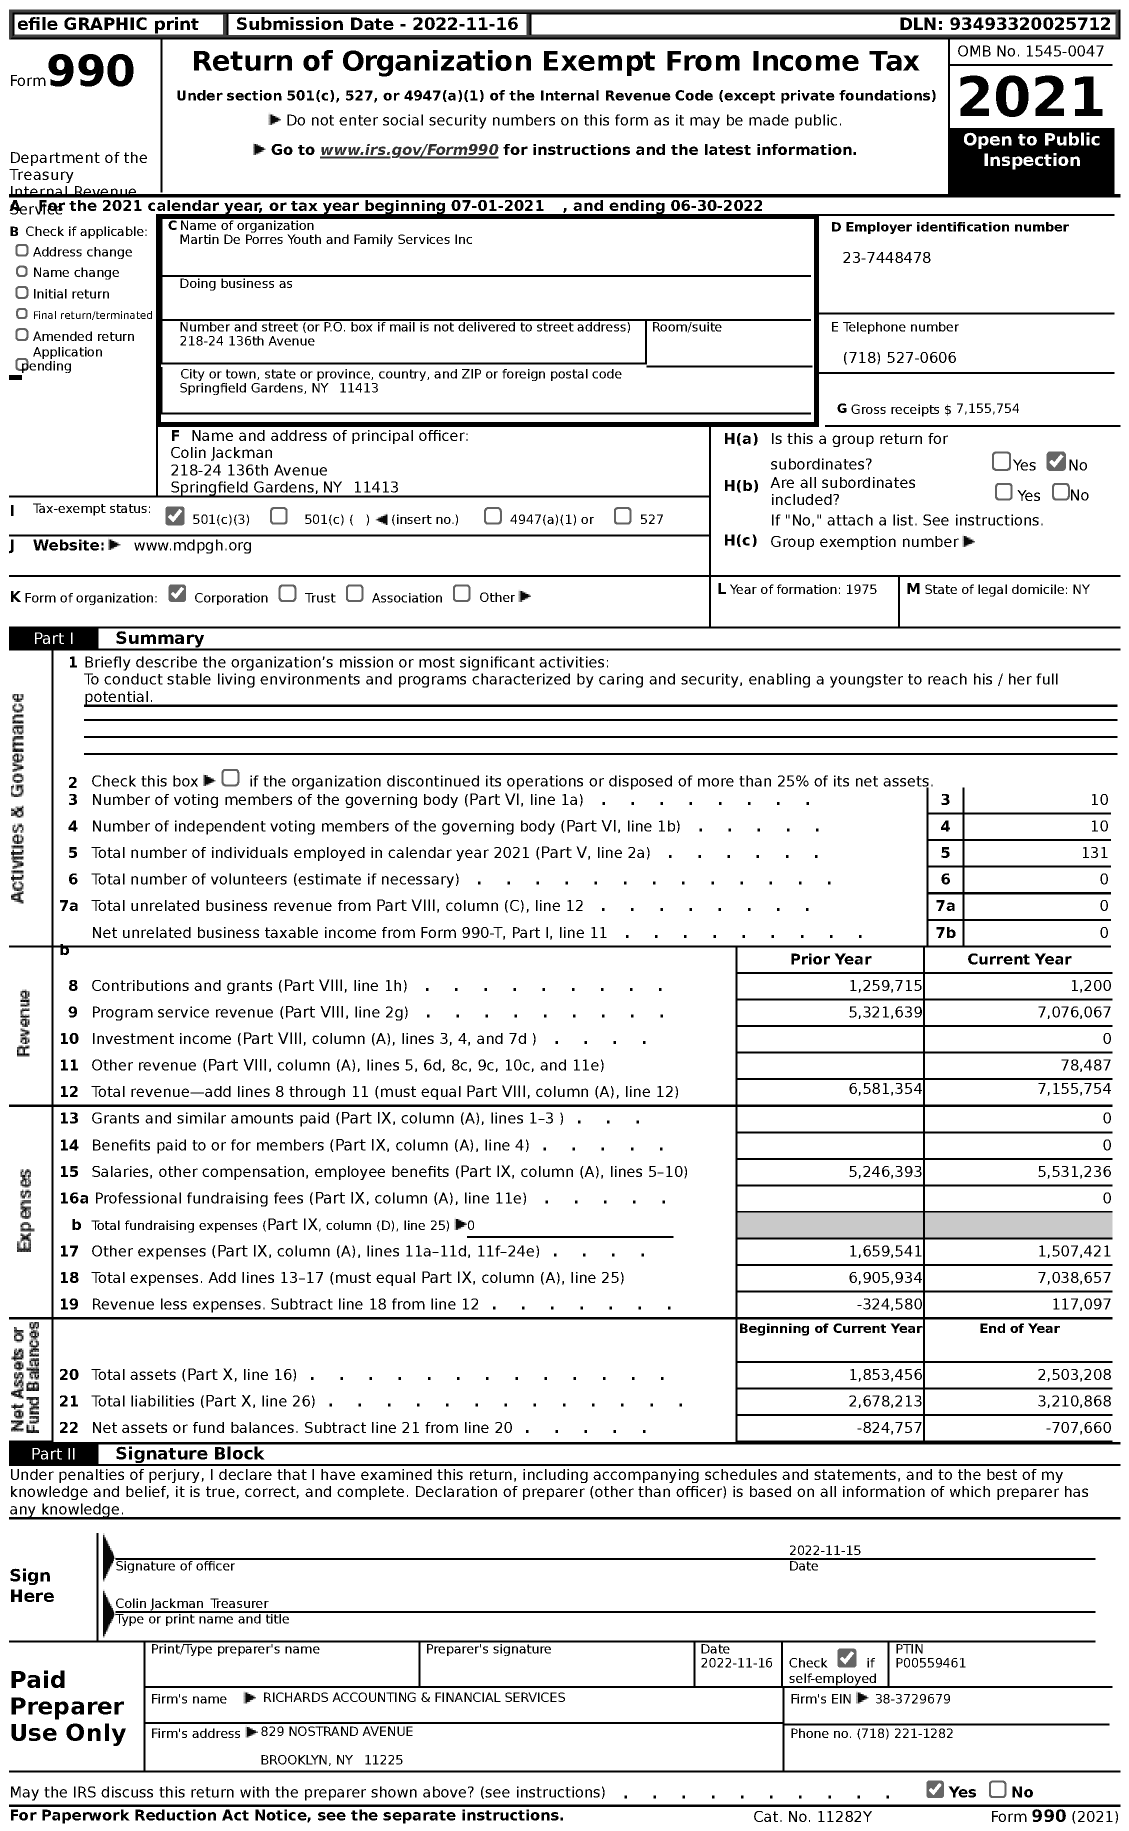 Image of first page of 2021 Form 990 for Martin De Porres Youth and Family Services (MDPGH)